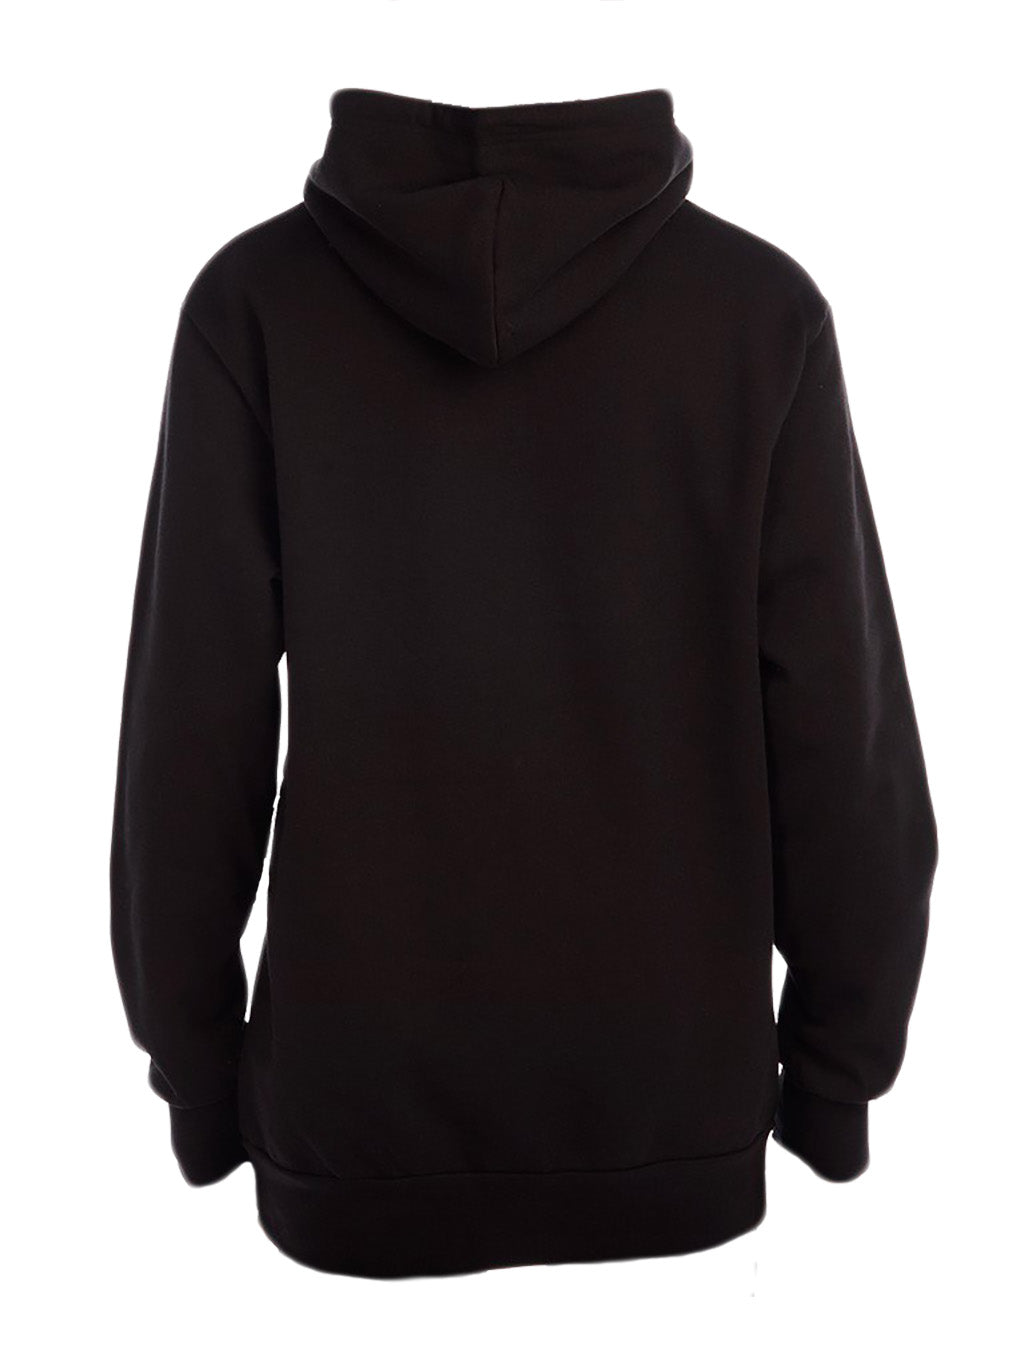 Gaming Mode - Activated - Hoodie - BuyAbility South Africa